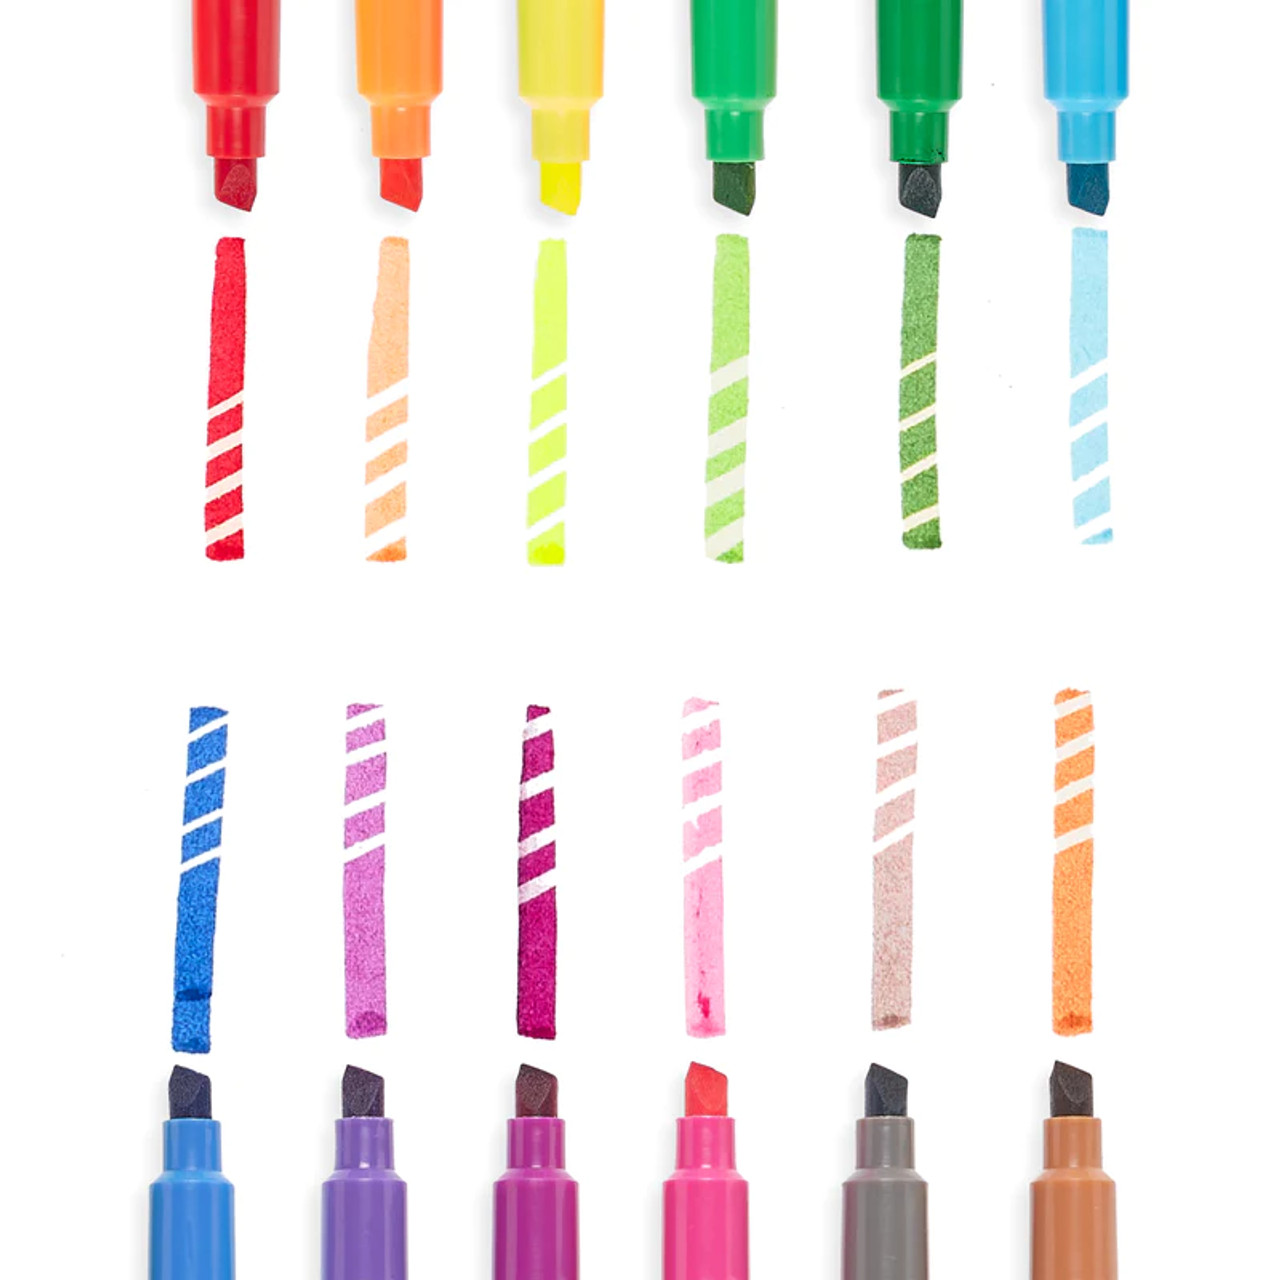 Erasable Markers 12 Pack